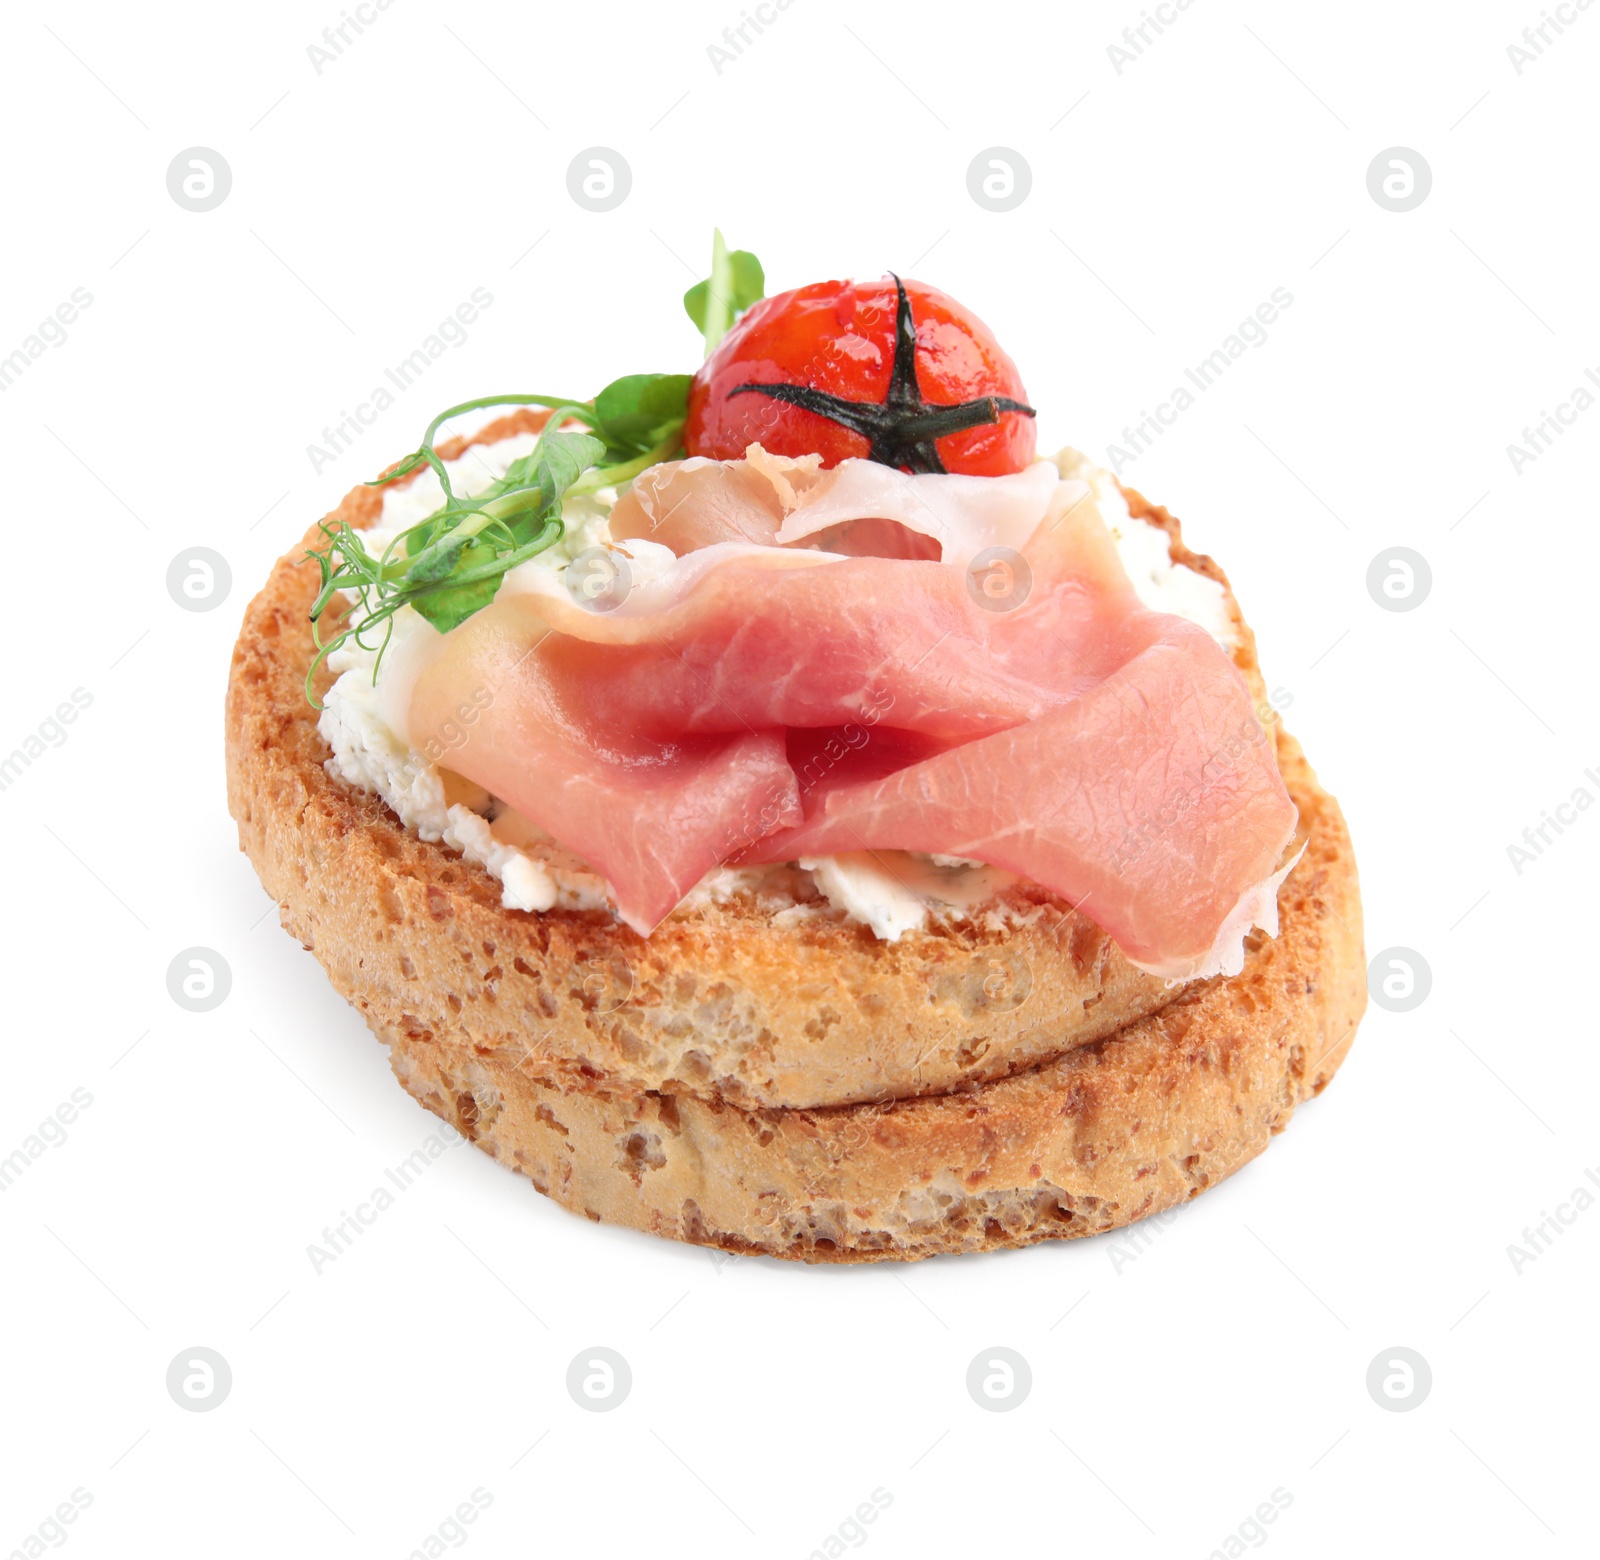 Photo of Tasty rusk with prosciutto, cream cheese and tomato on white background